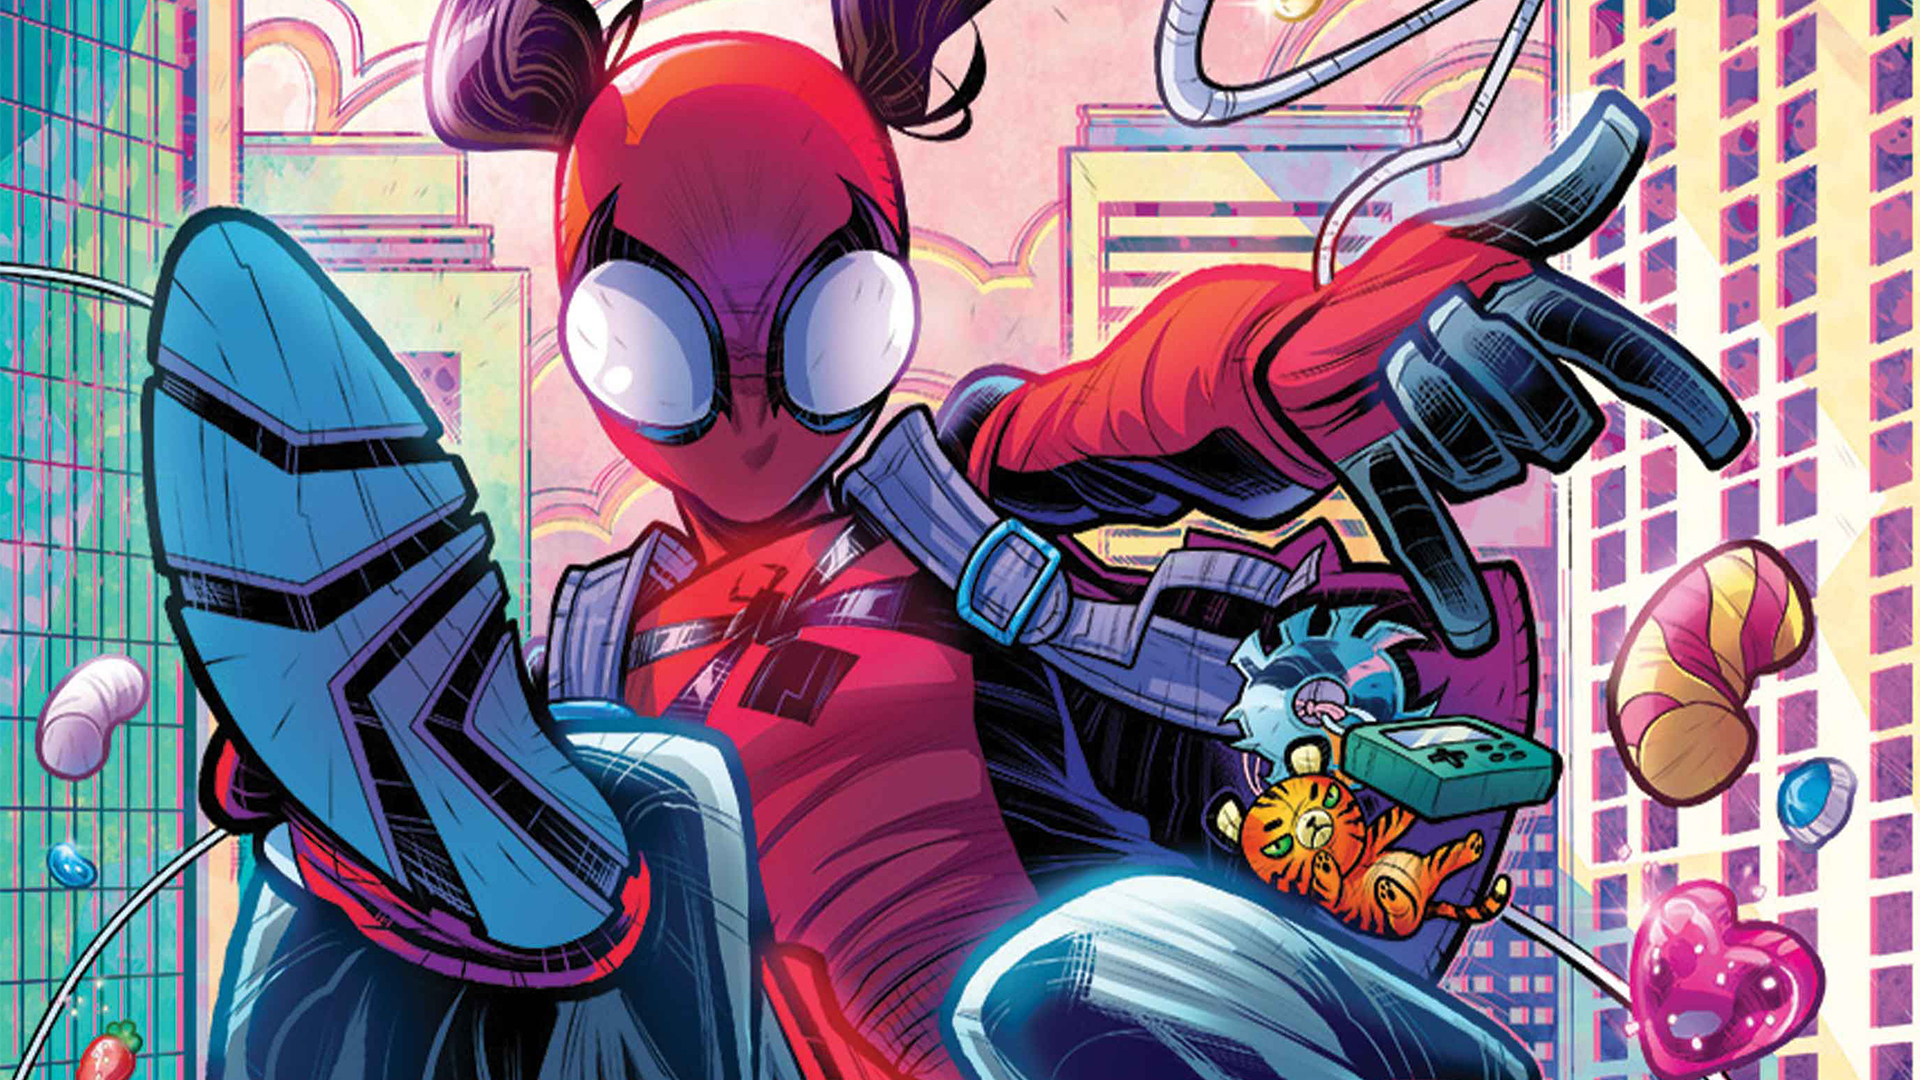  Meet the all new Spider-Girl with a mysterious origin that will keep readers guessing 